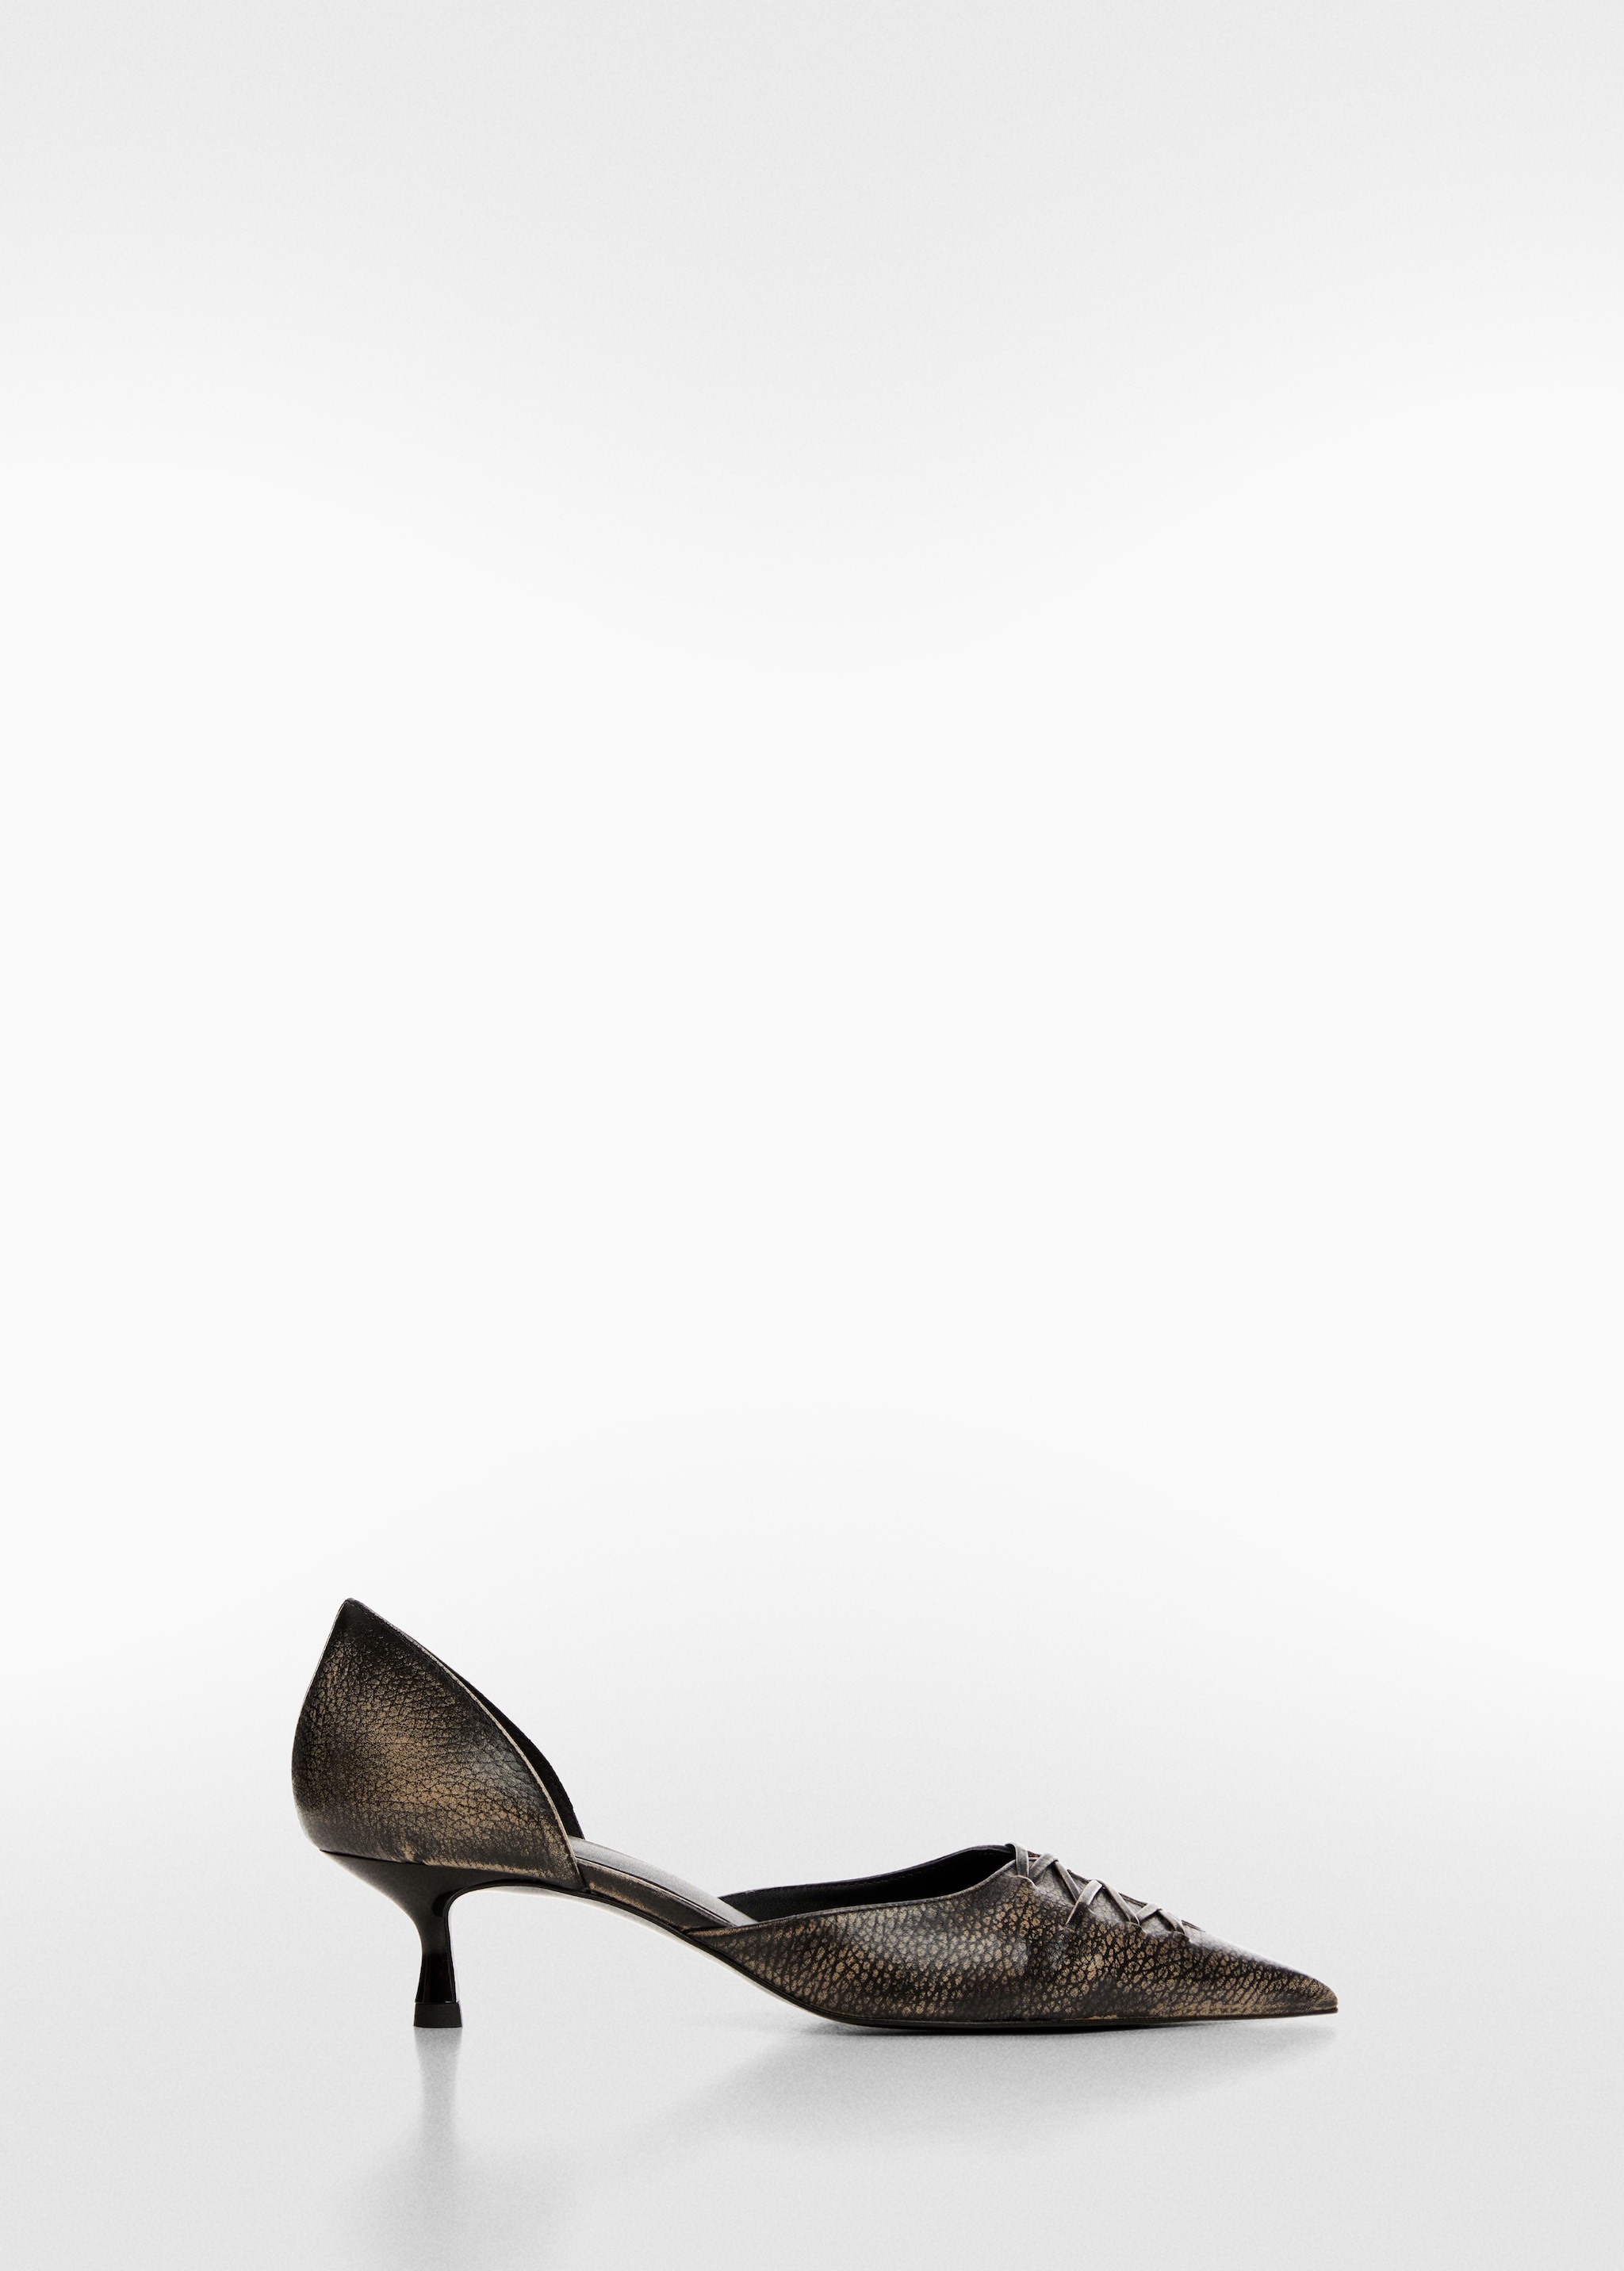 Pointed toe leather shoes - Article without model